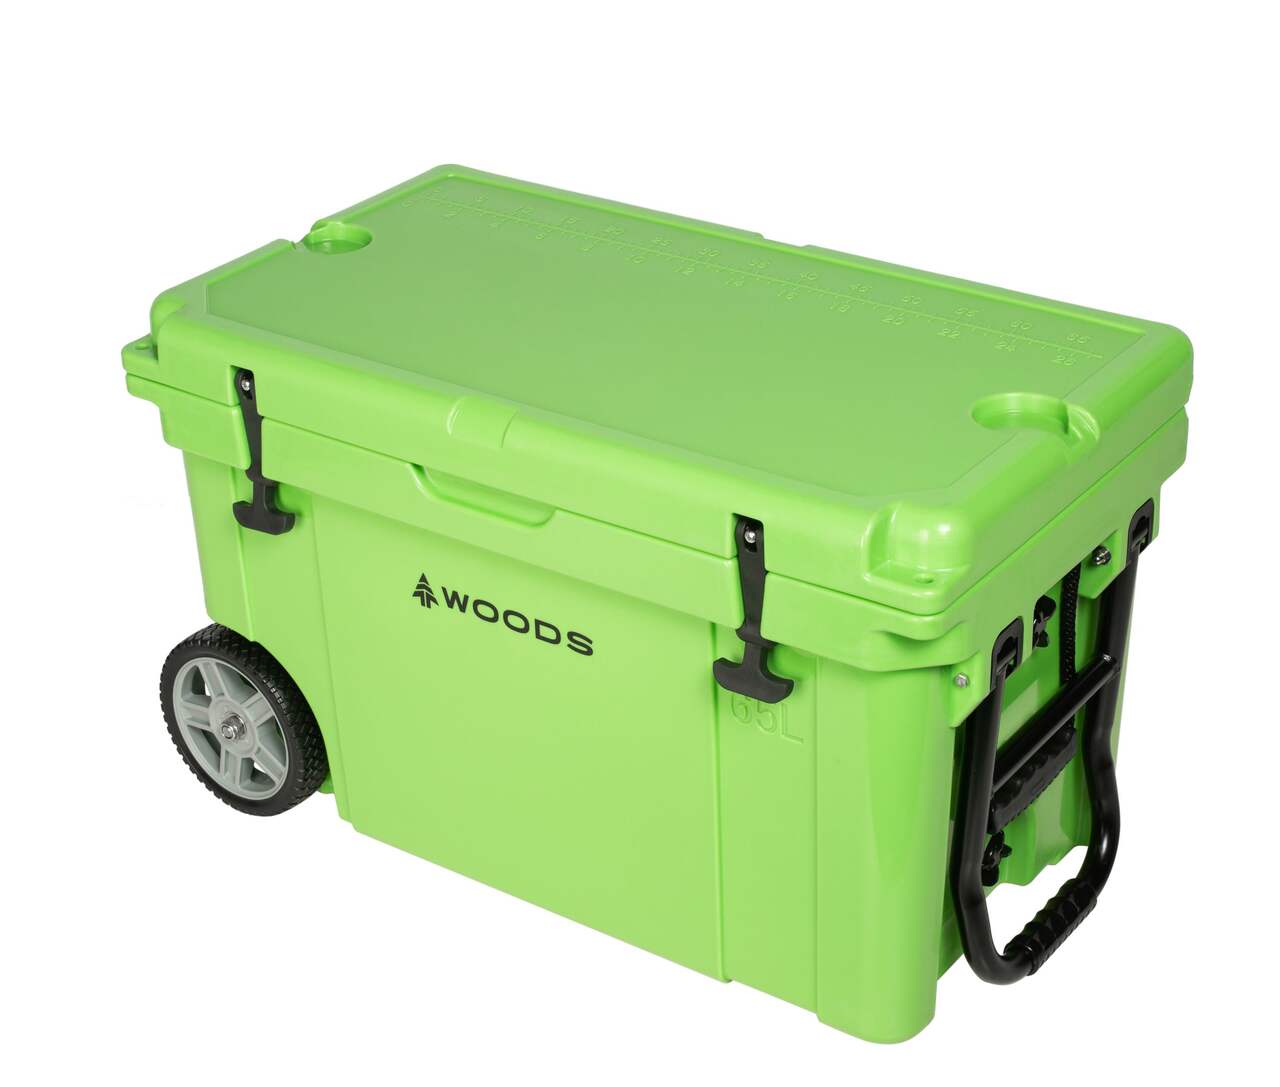 Woods ARCTIC WHEELED Roto-Moulded Cooler with Handle, 65-L, Parrot Green